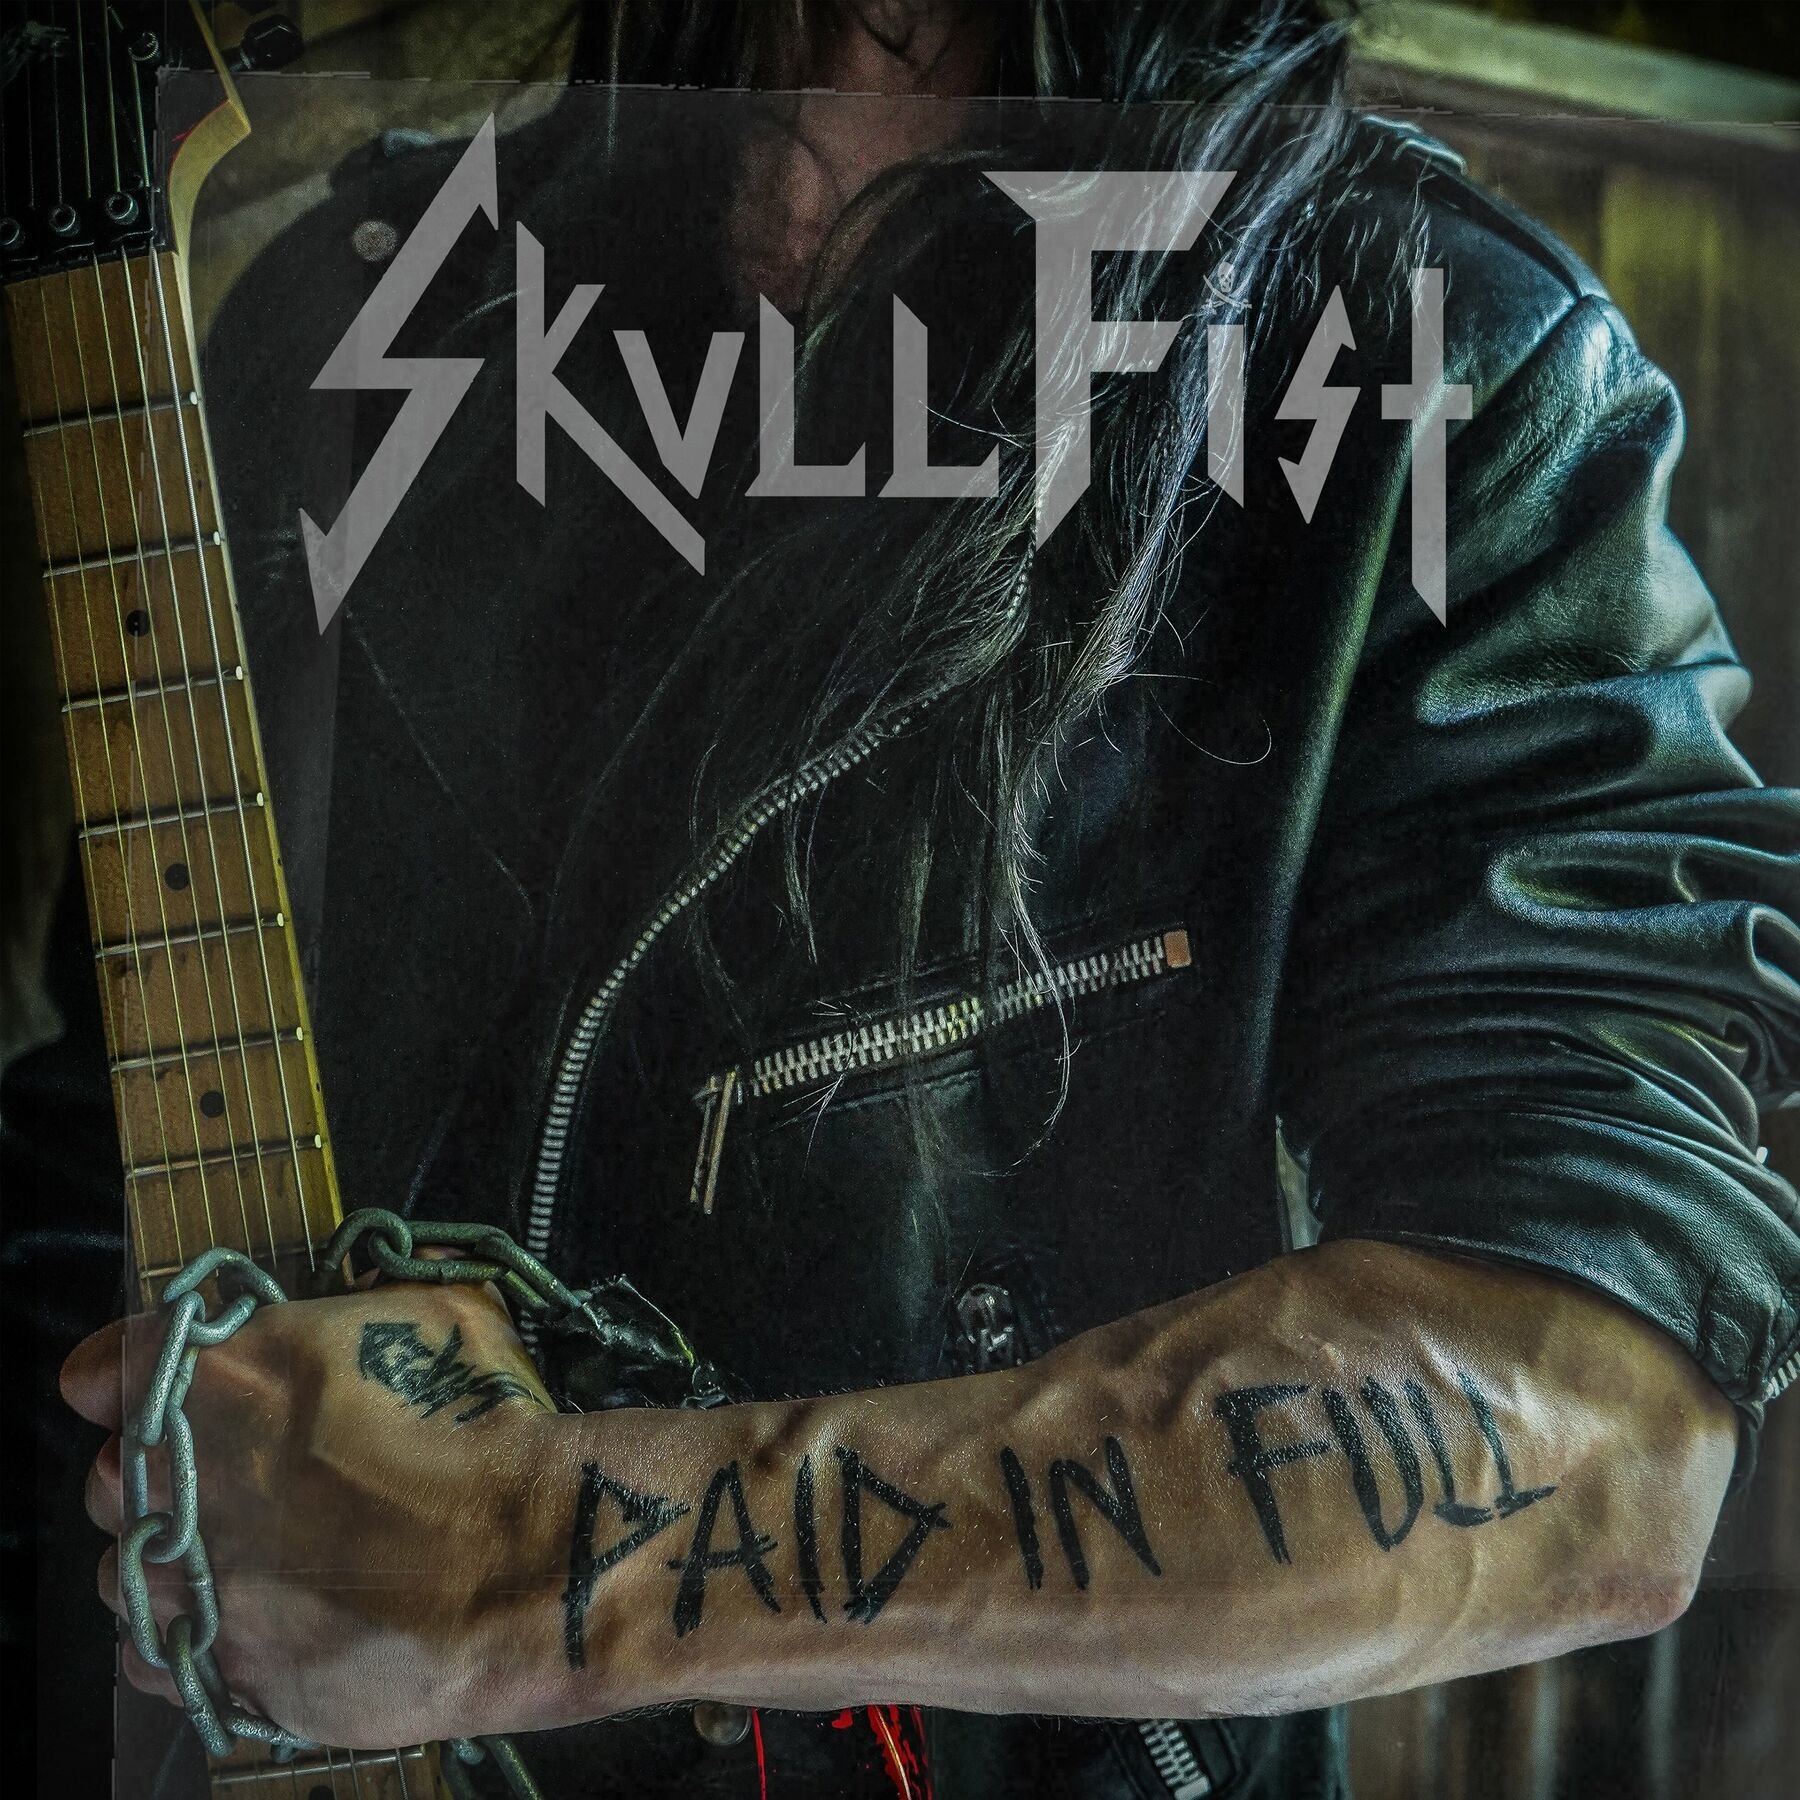 Skull Fist - Paid In Full (2022) FLAC Download